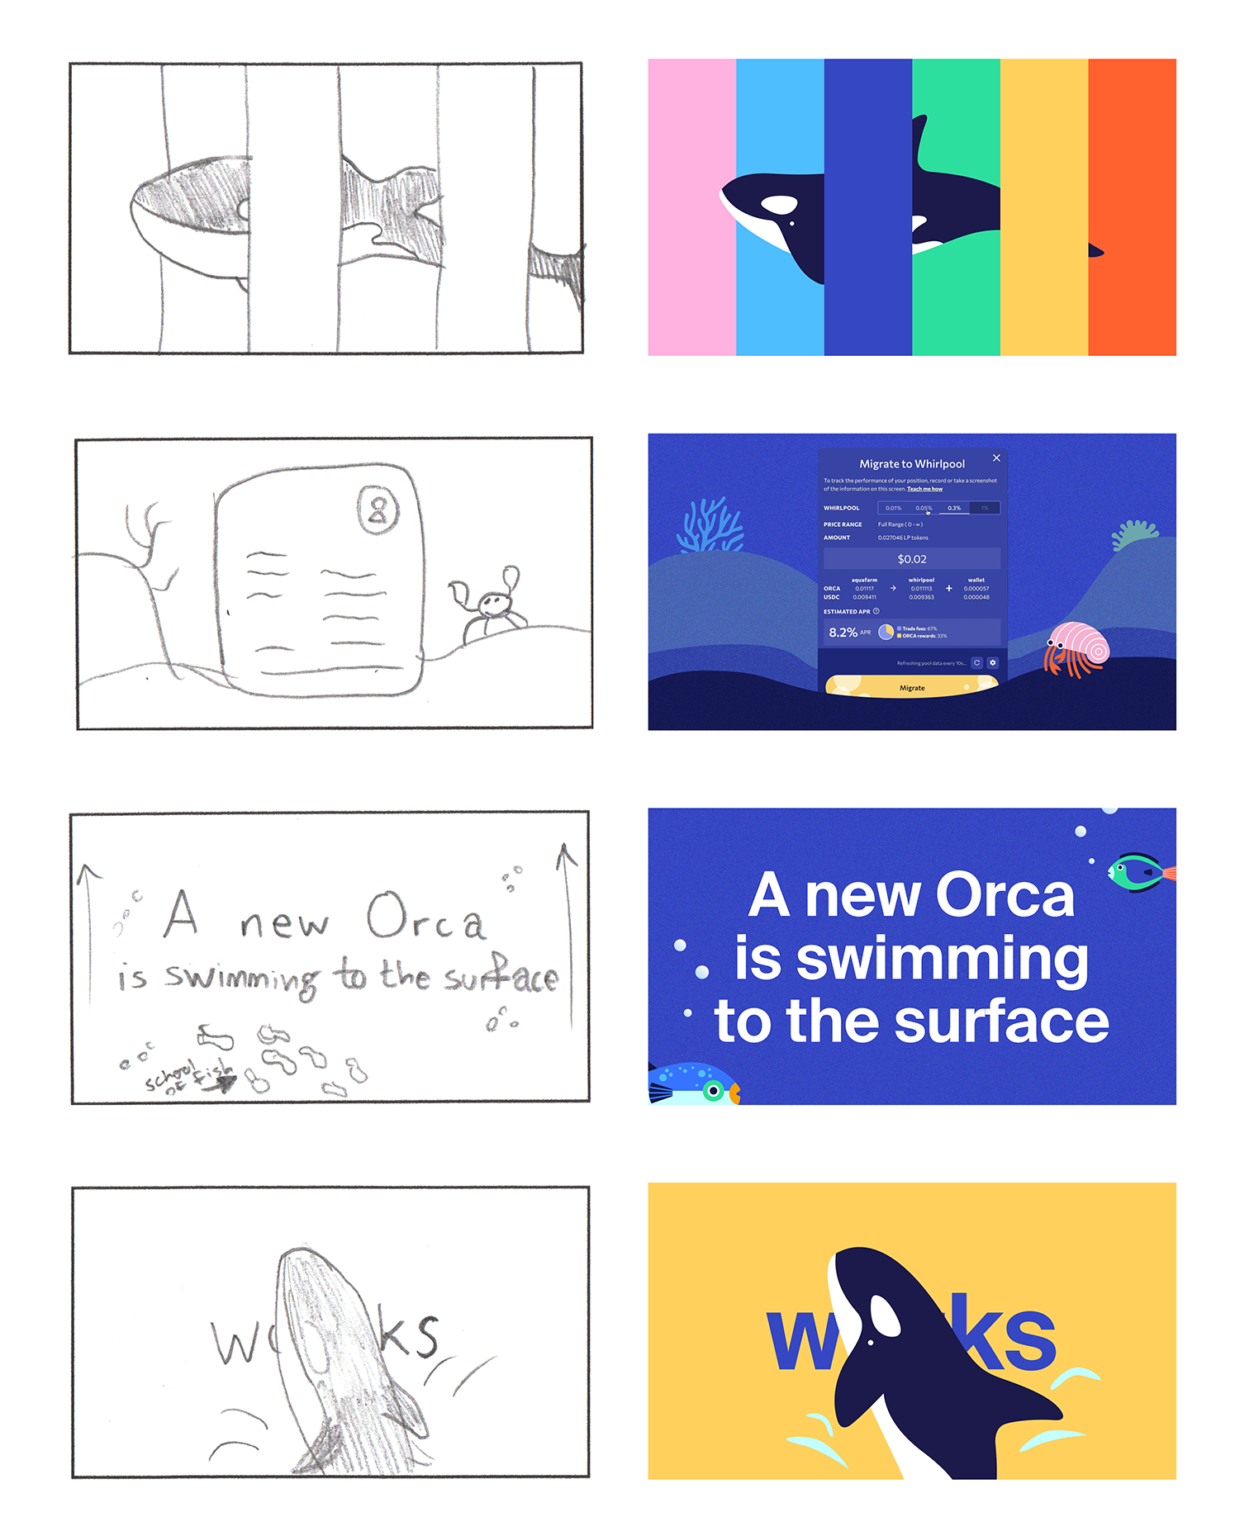 Orca Storyboards vs. Style Frames